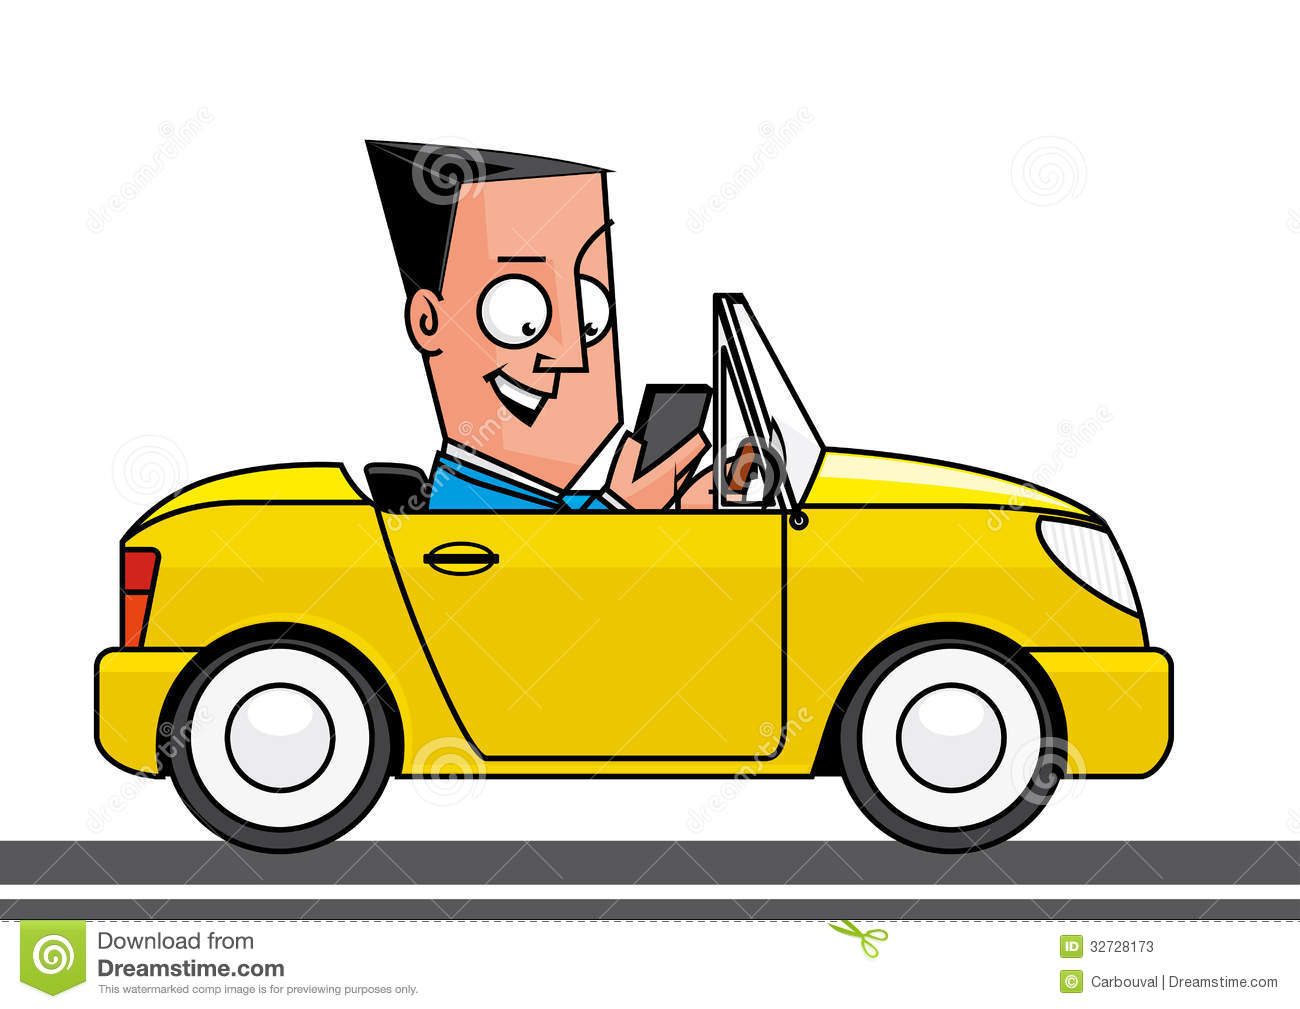 Driving And Using A Smartphone Stock Photos   Image  32728173